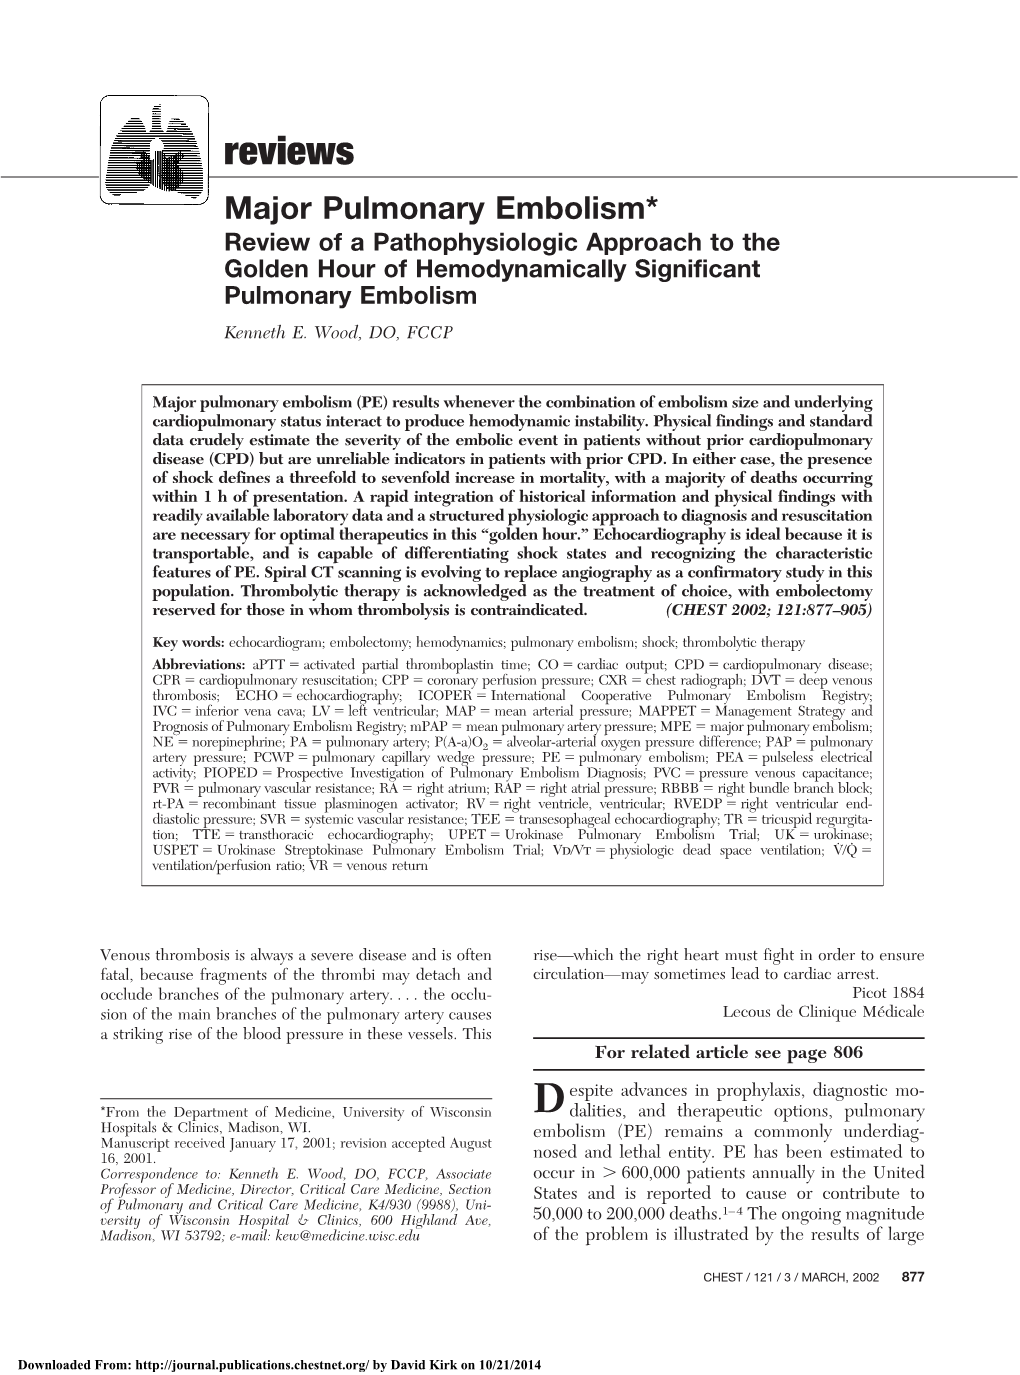 Reviews Major Pulmonary Embolism* Review of a Pathophysiologic Approach to the Golden Hour of Hemodynamically Significant Pulmonary Embolism Kenneth E